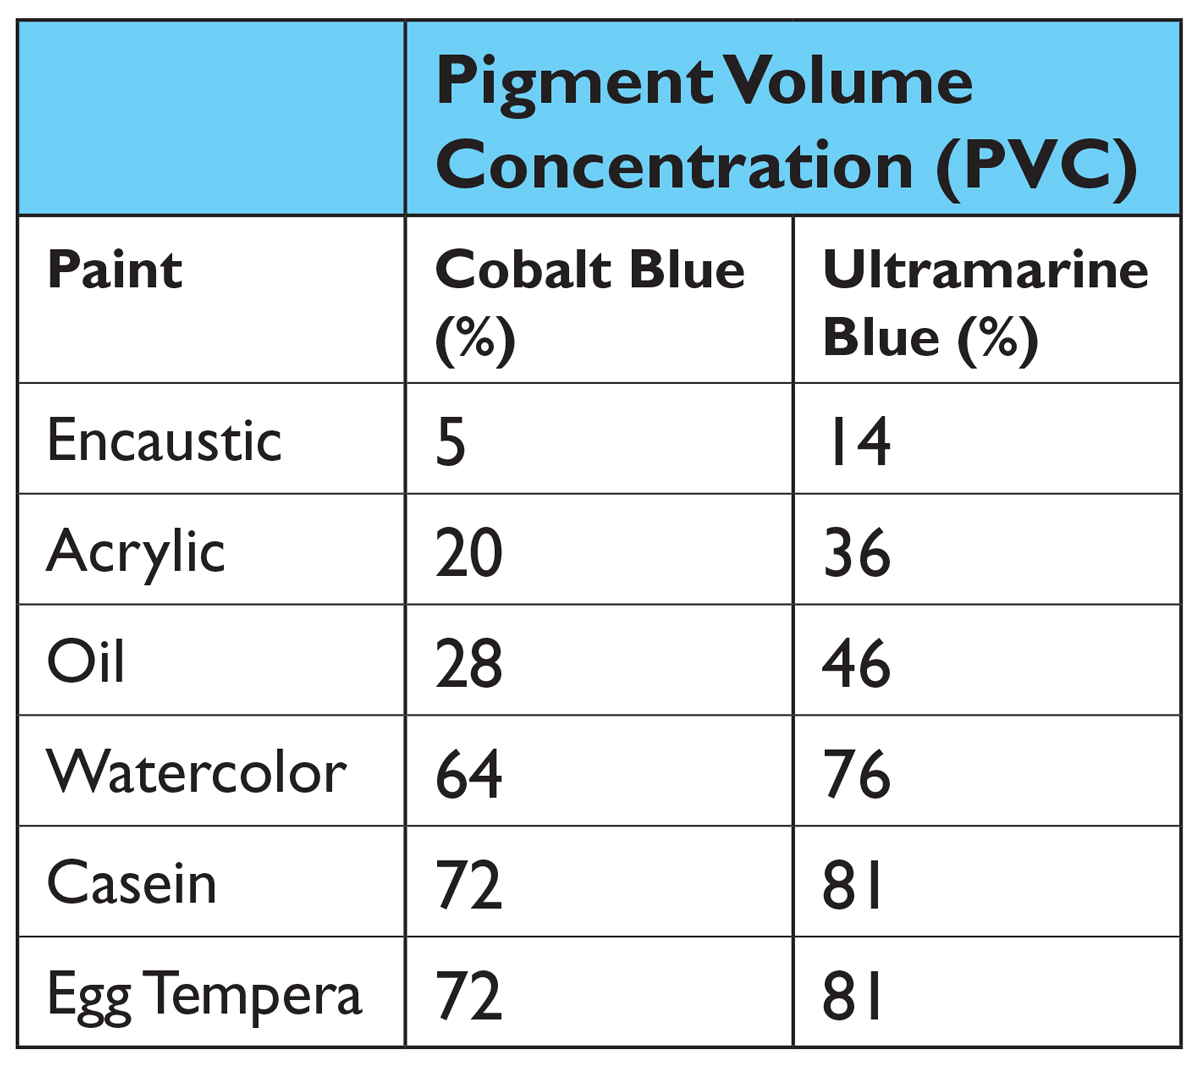 Pigment Volume Concentration and its Role in Color